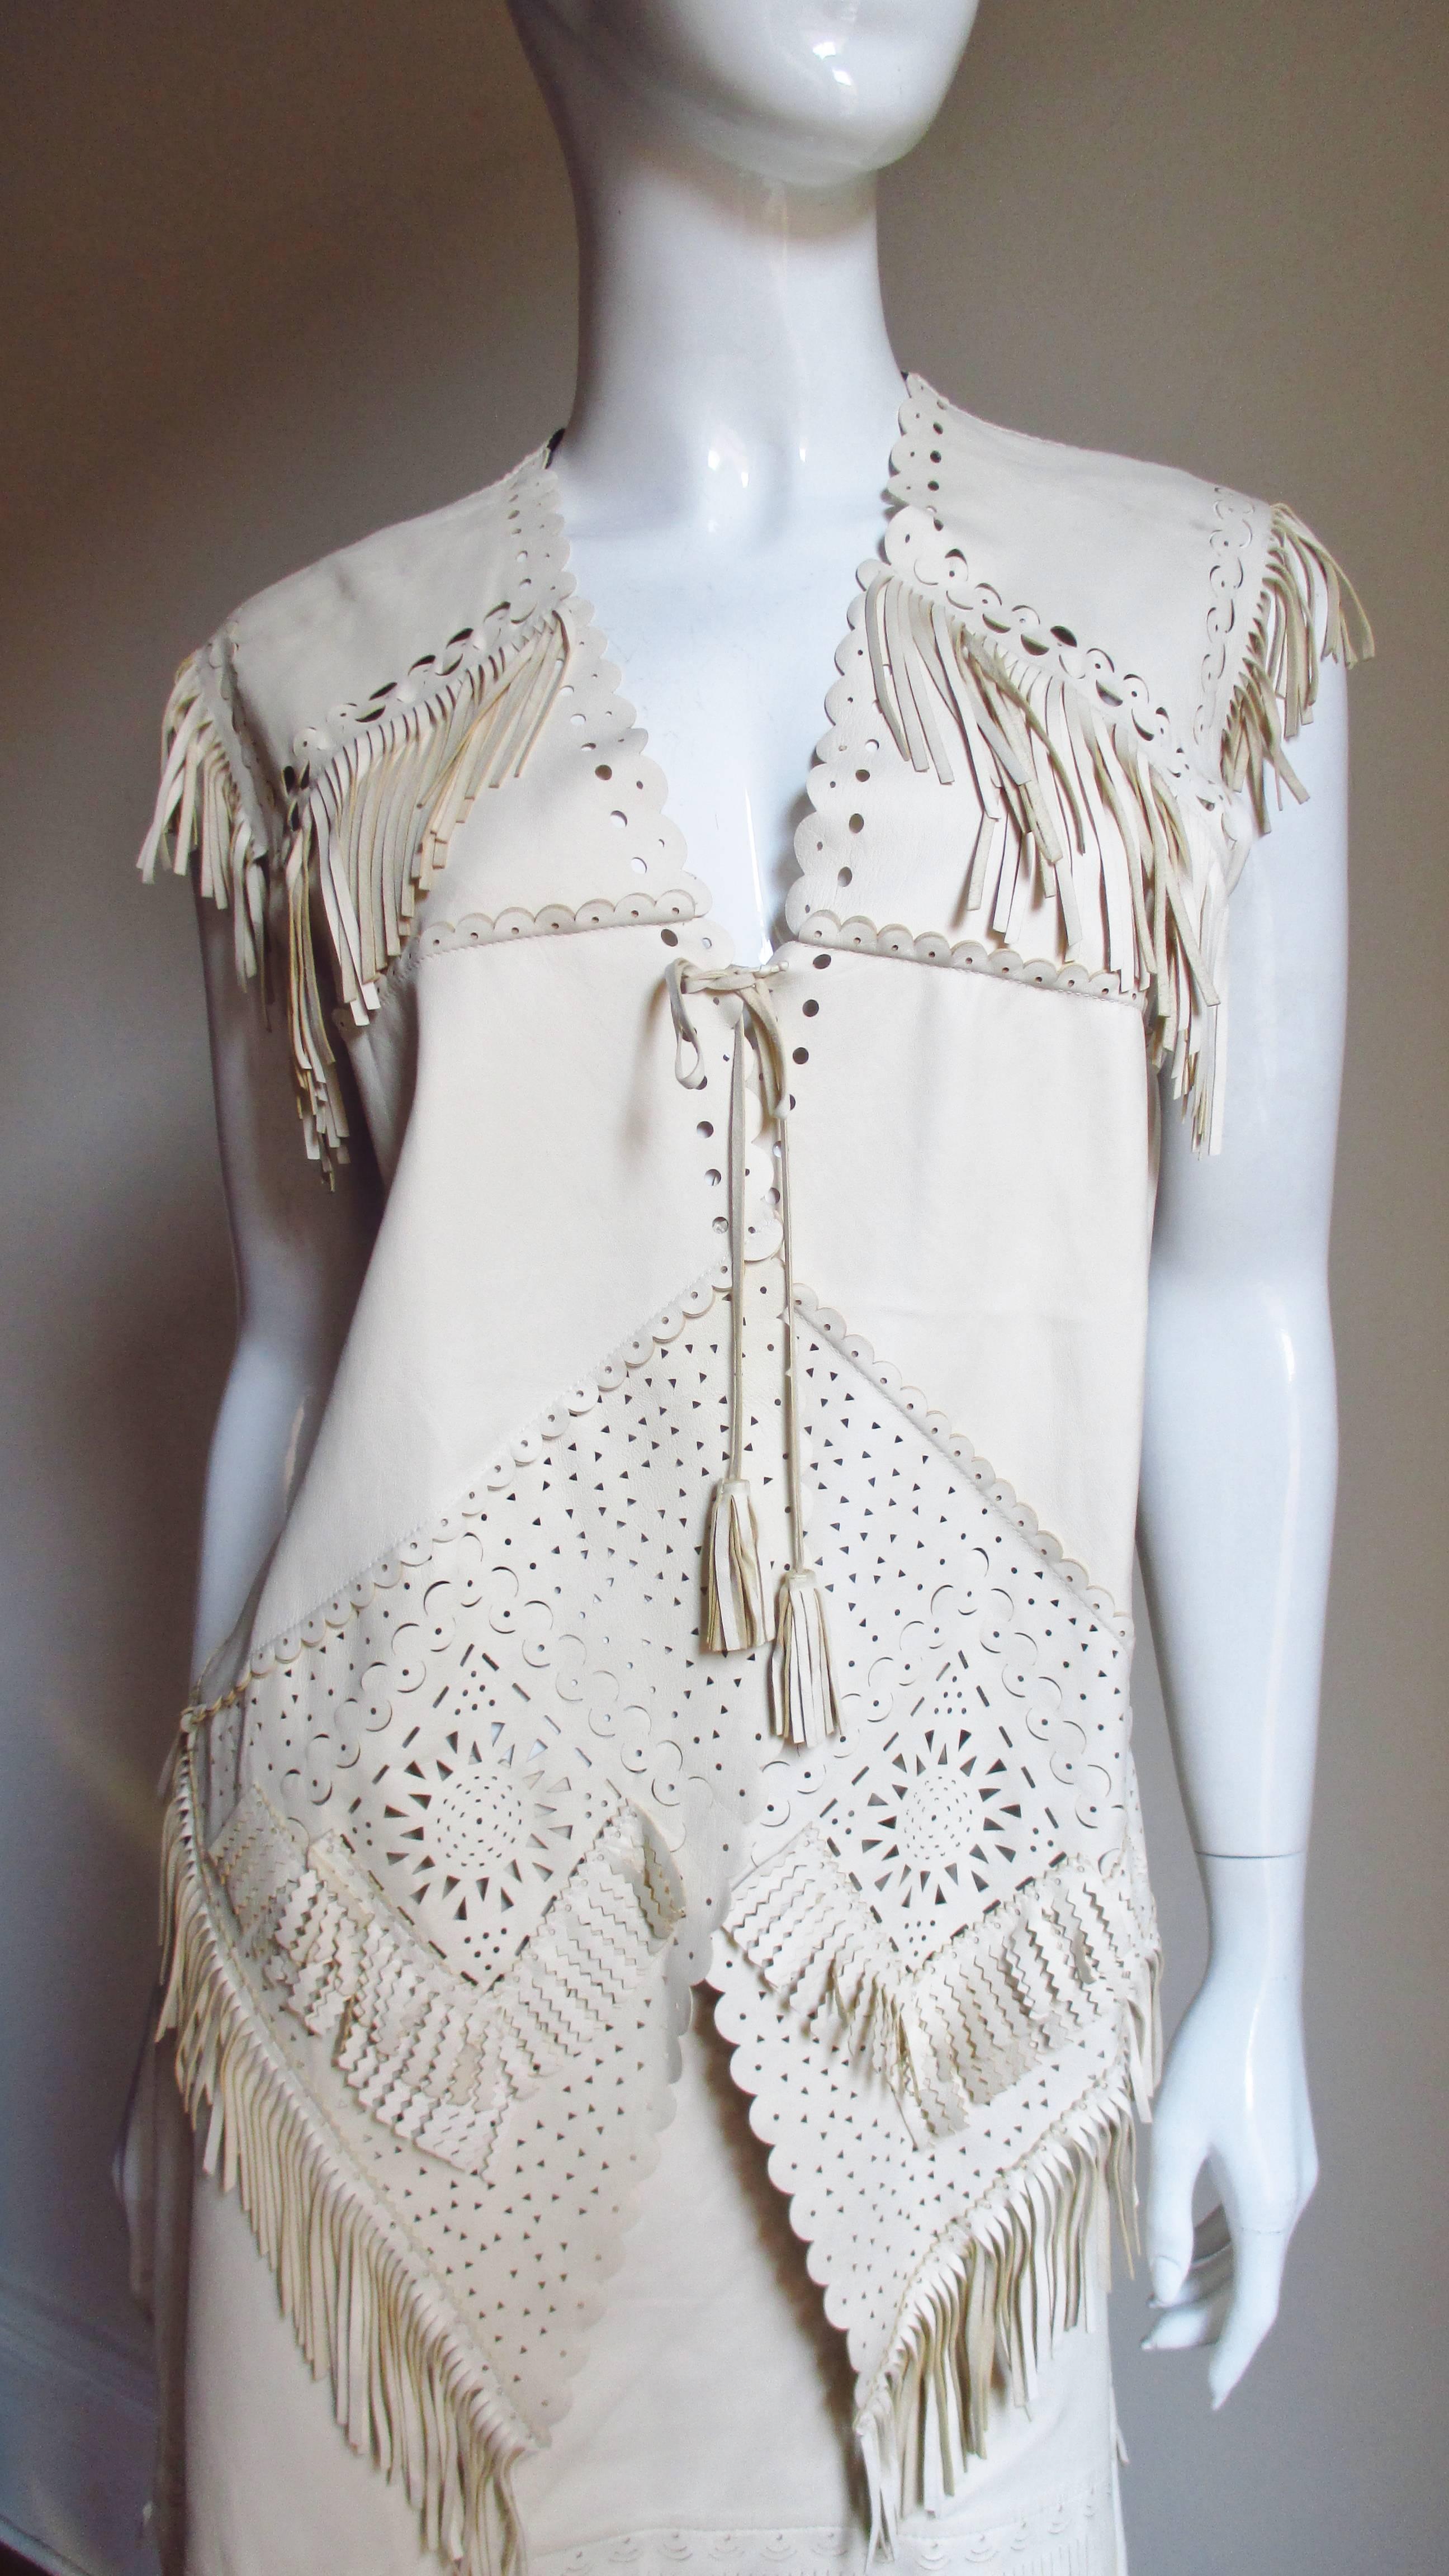 A fabulous set from Jean Paul Gaultier in a very fine, soft, supple bone colored leather.  It consist of a vest/top/jacket laser cut in different shapes and patterns, appliqued with varying lengths of fringe and a pointed front hem.  It has a